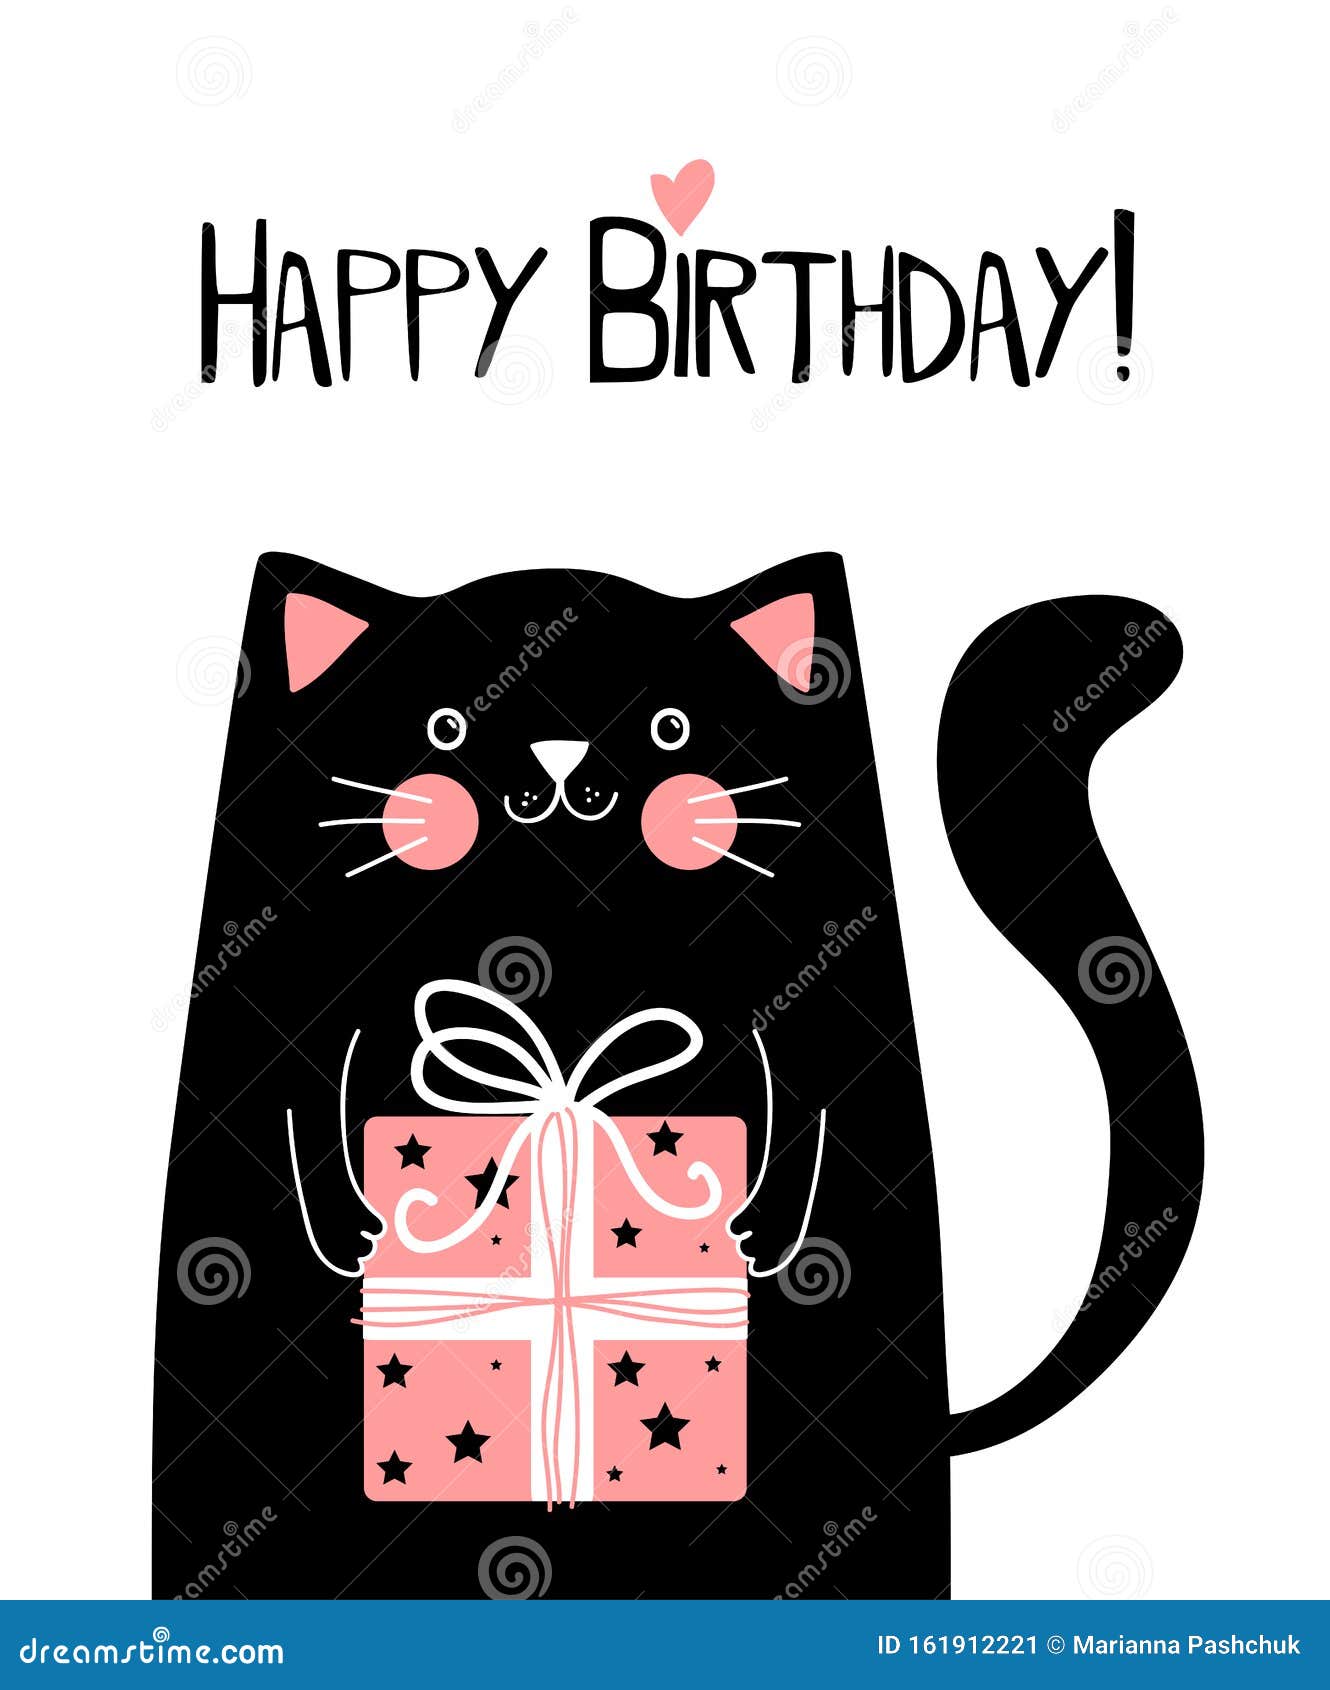 Happy Birthday Card With Black Cat And Gift Vector Illustration Royalty Free Cliparts Vectors And Stock Illustration Image 90400948